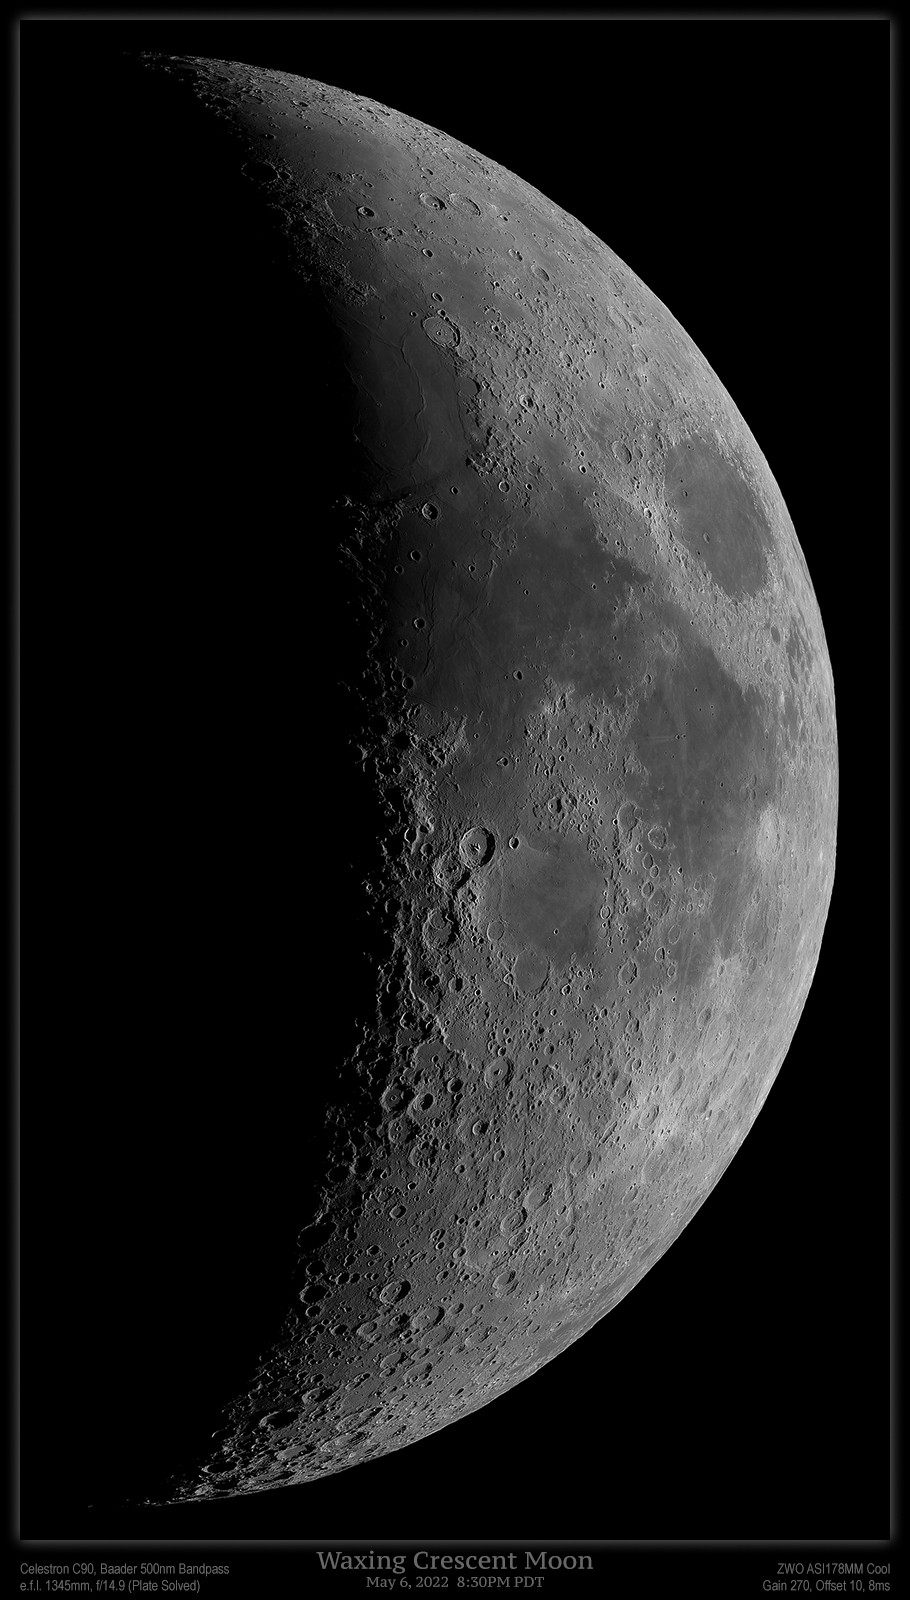 Waxing Crescent Moon with Celestron C90 And ZWO ASI178MM Cool (small)